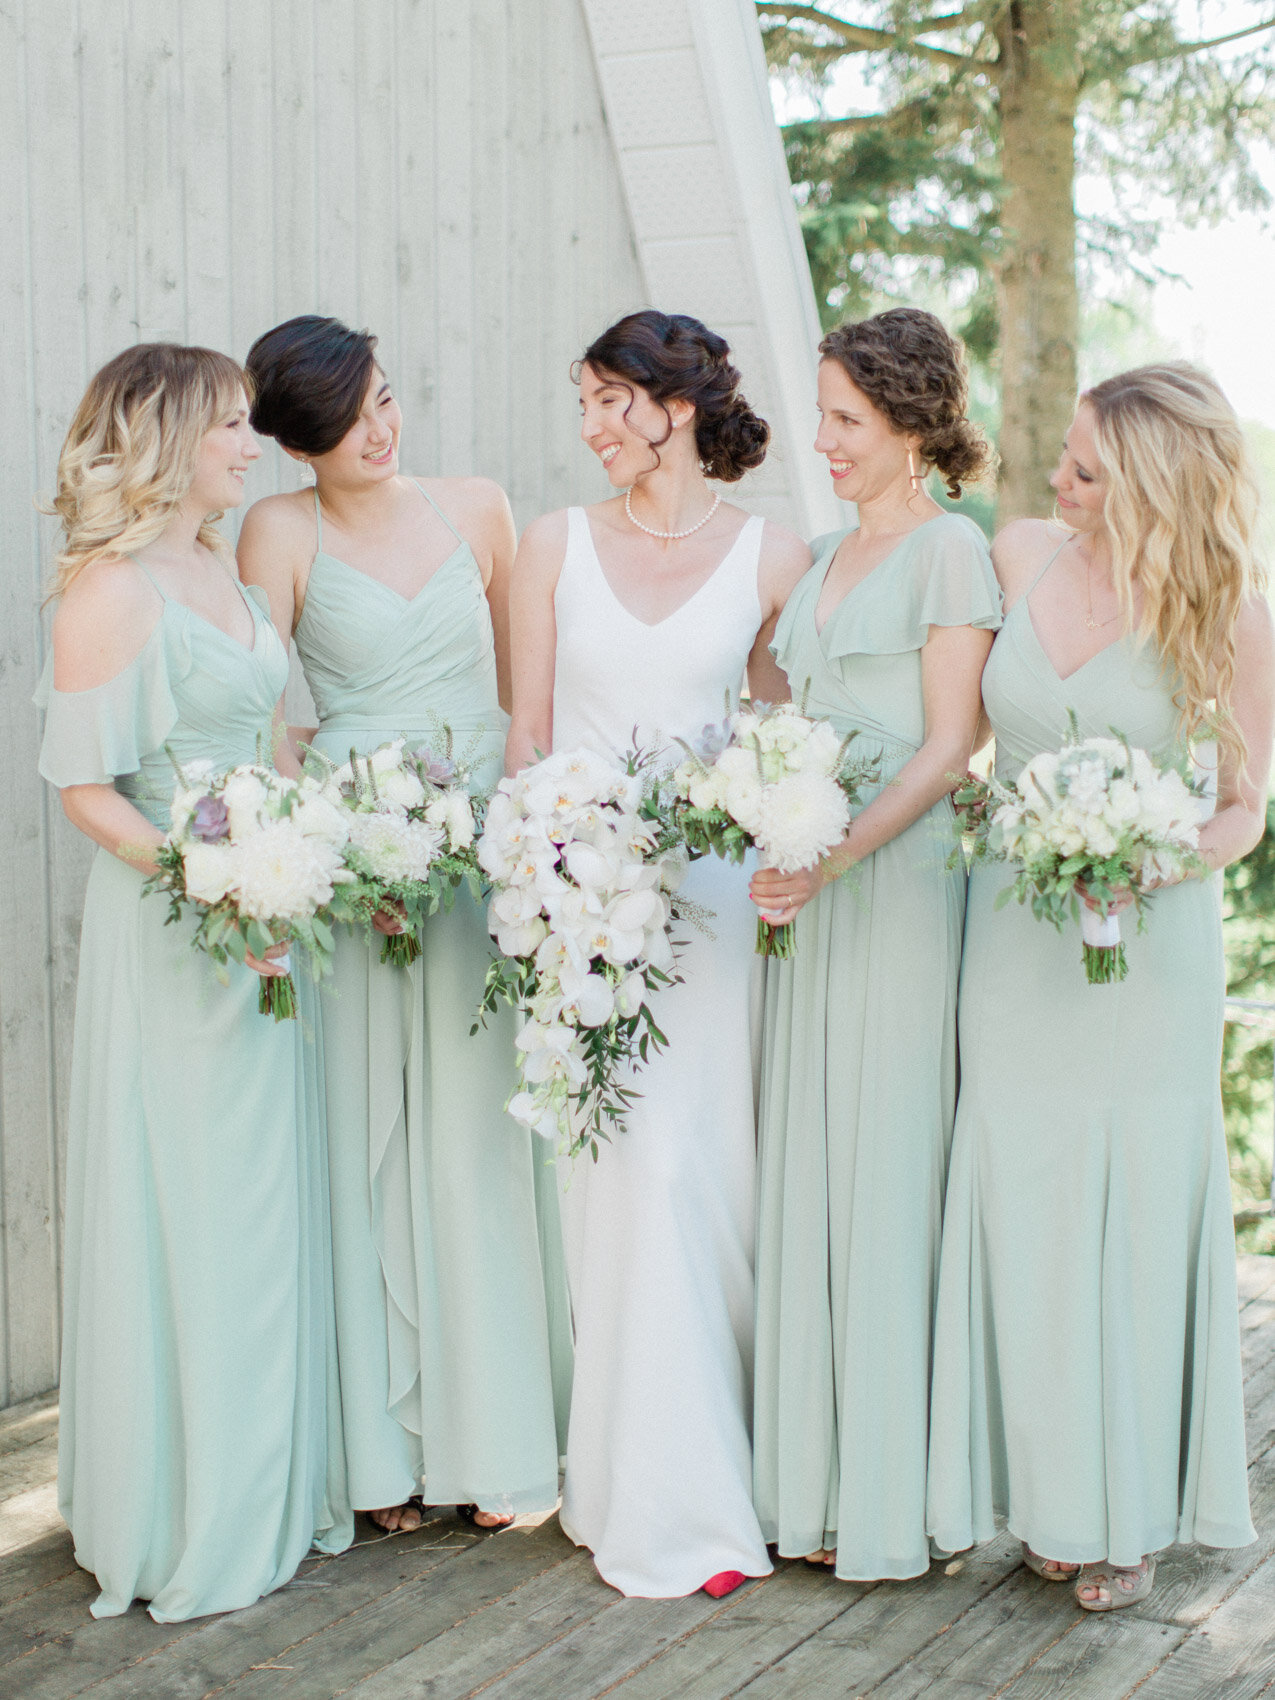 Bride and bridesmaids having fun together for some candid photos at silver springs retreat